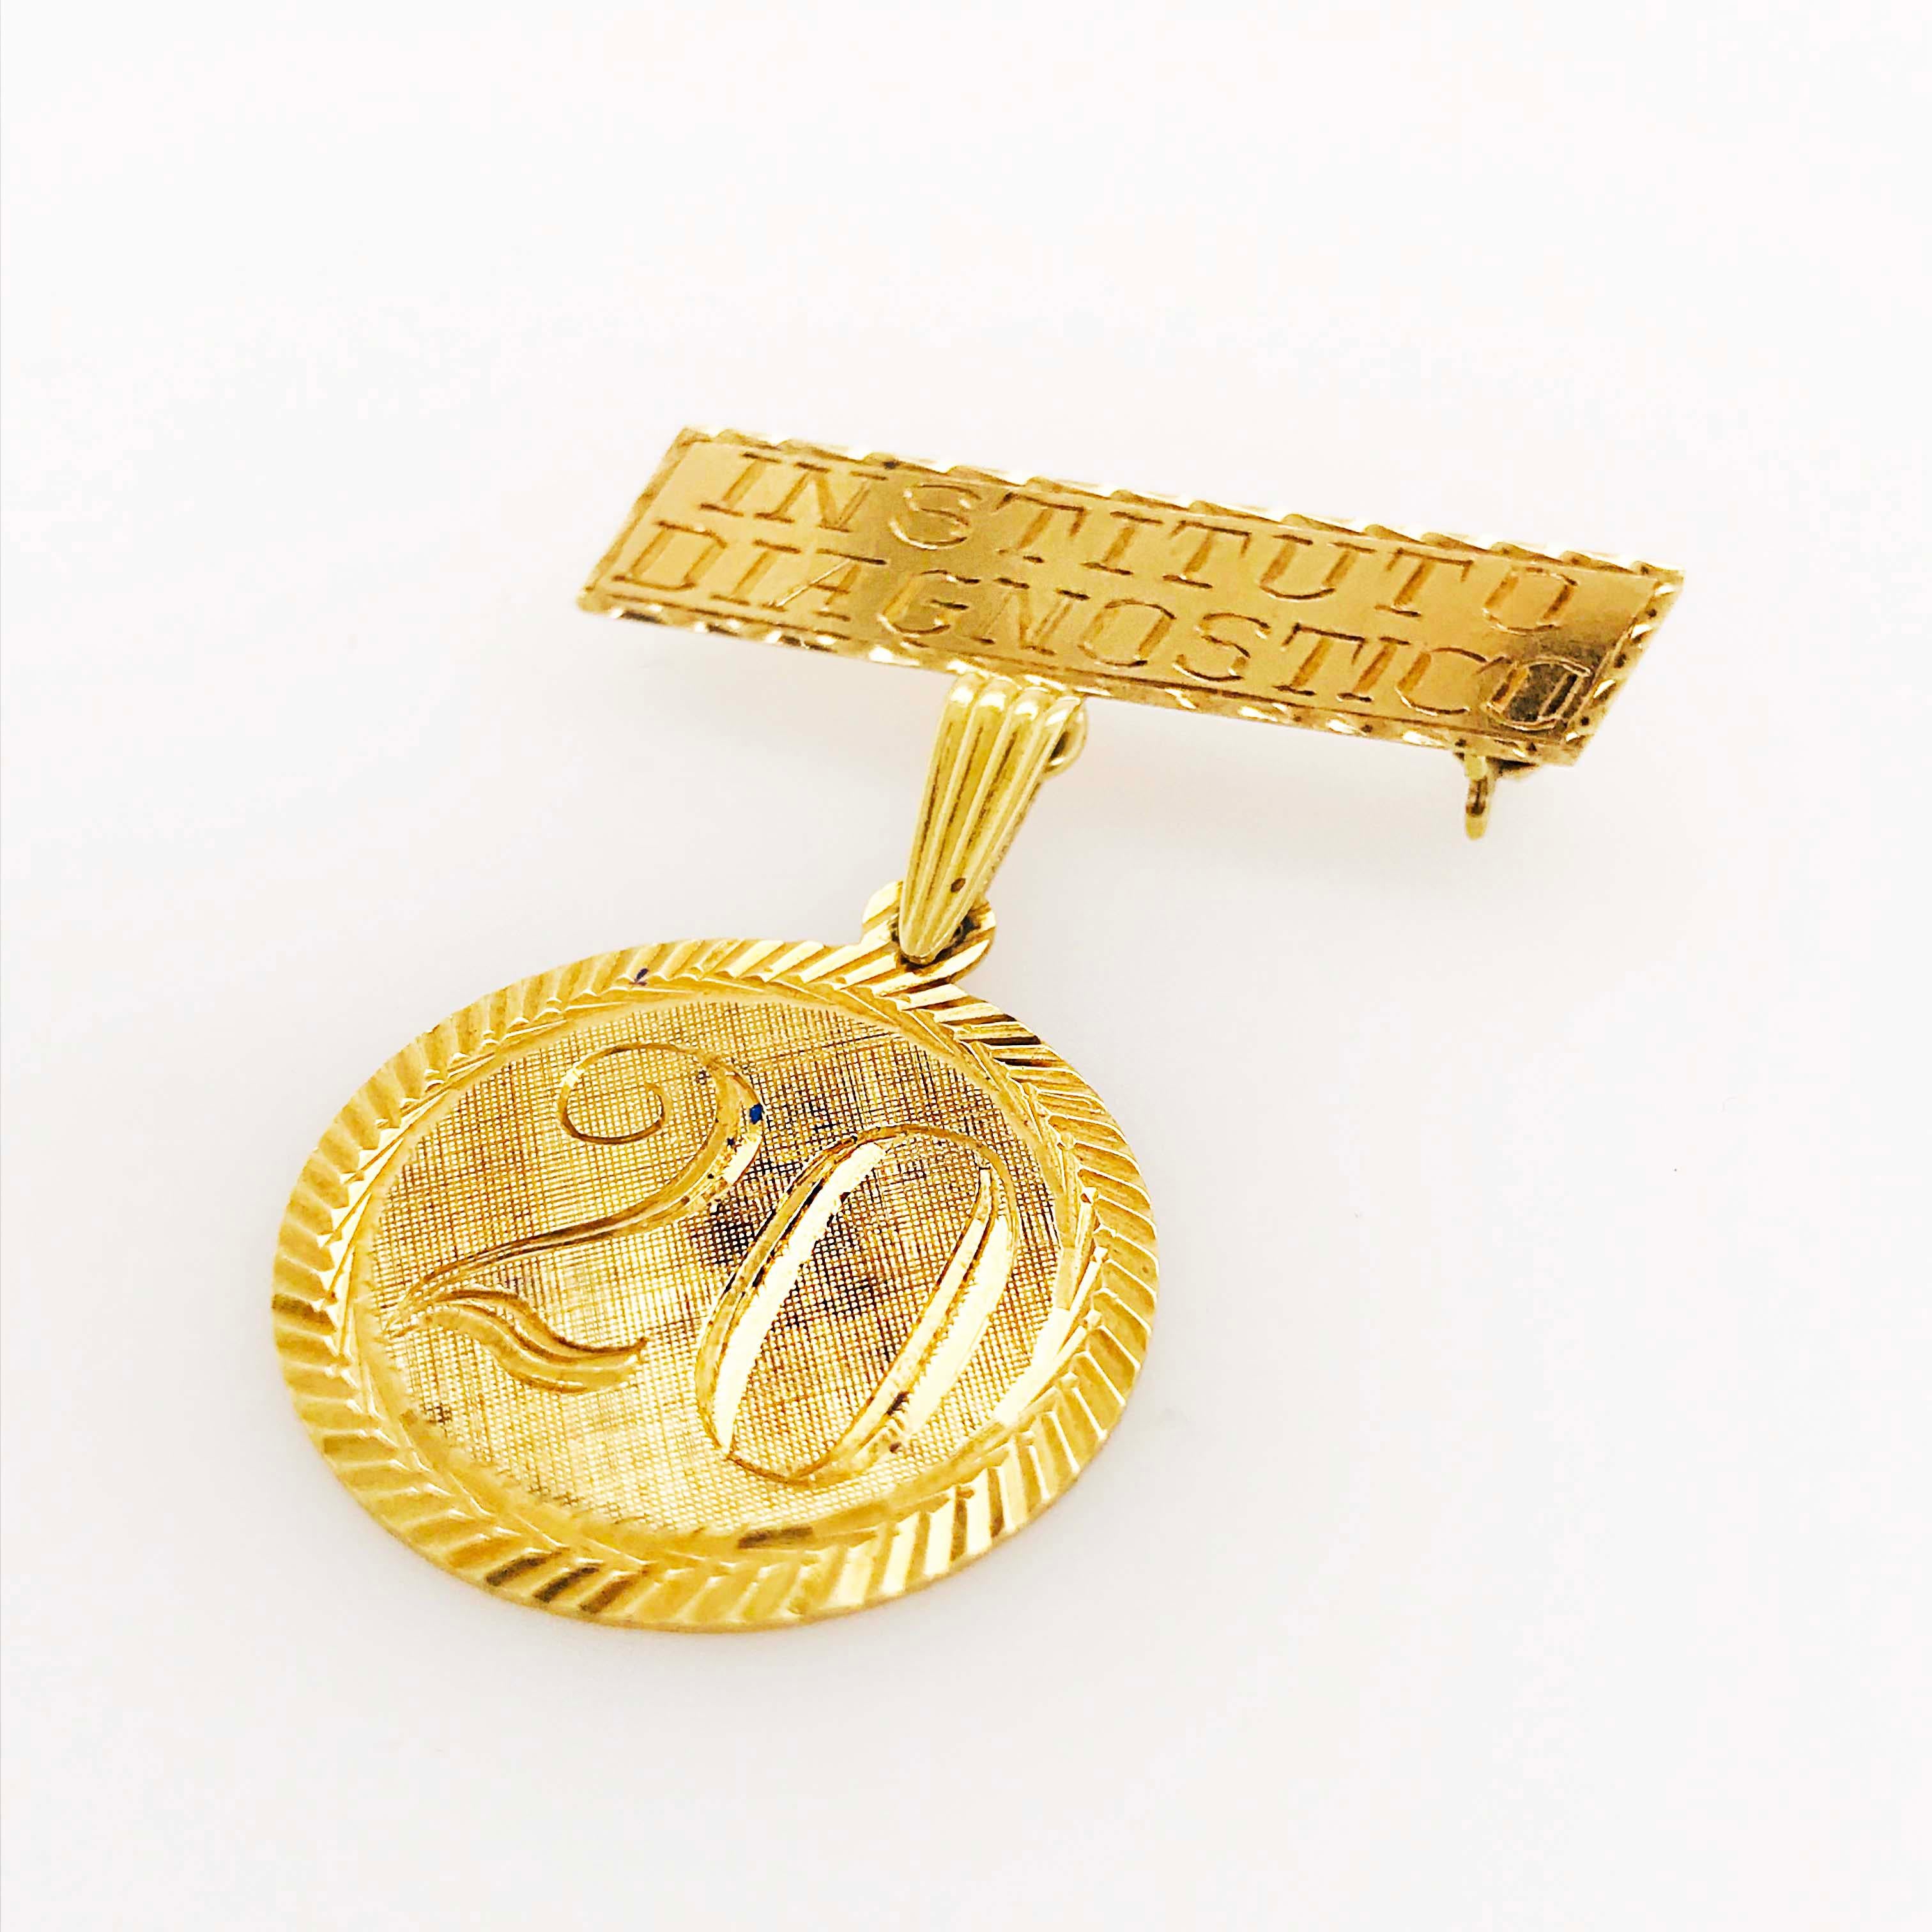 Aesthetic Movement Gold Institudo Diagnostico Pin with 18 Karat Gold 20 Year Coin Collectors Brooch